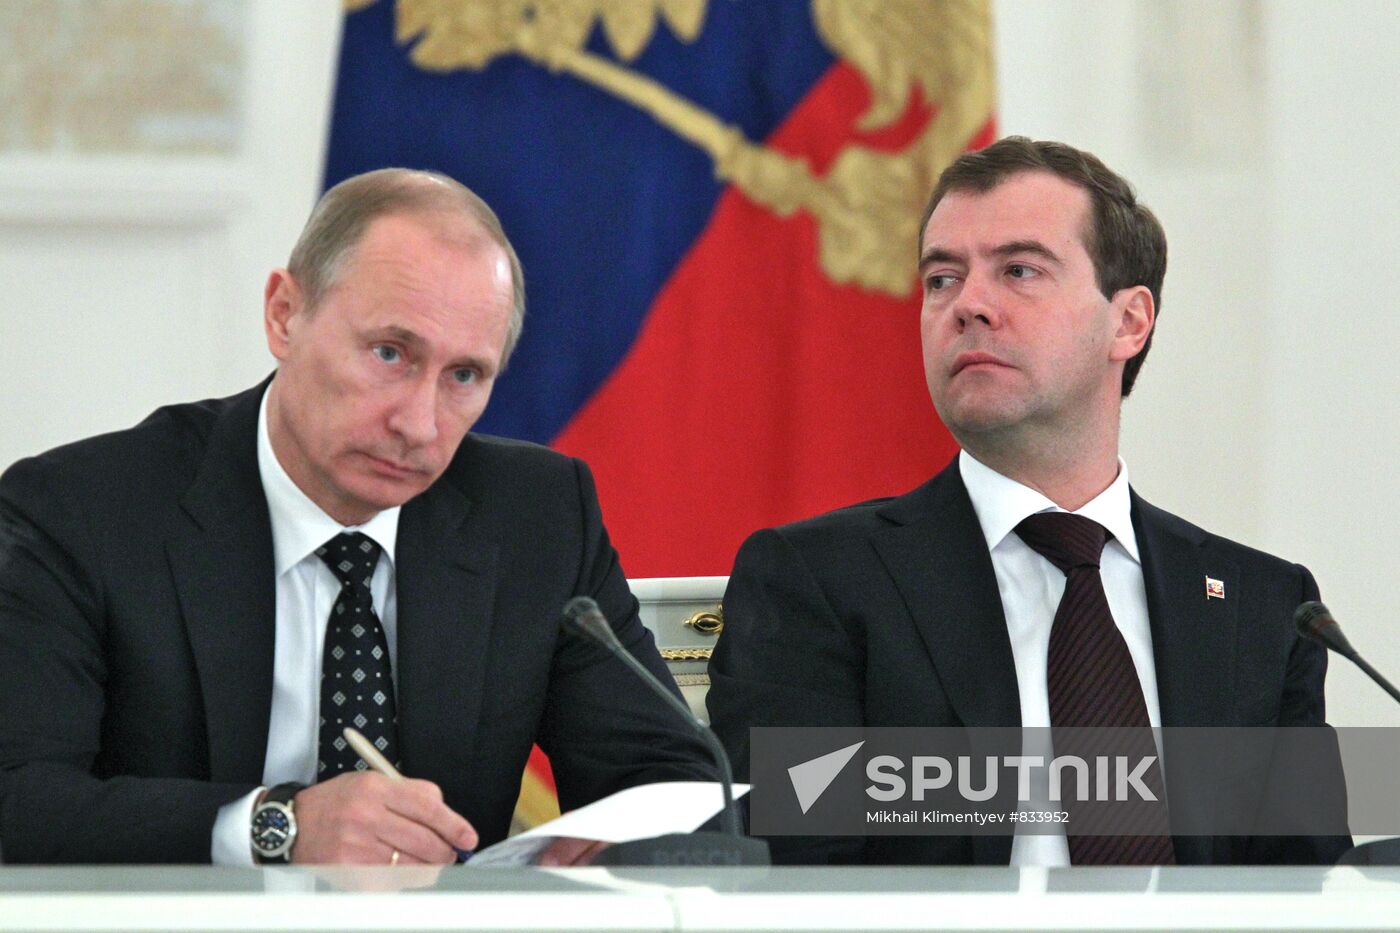 Dmitry Medvedev and Vladimir Putin at State Council meeting